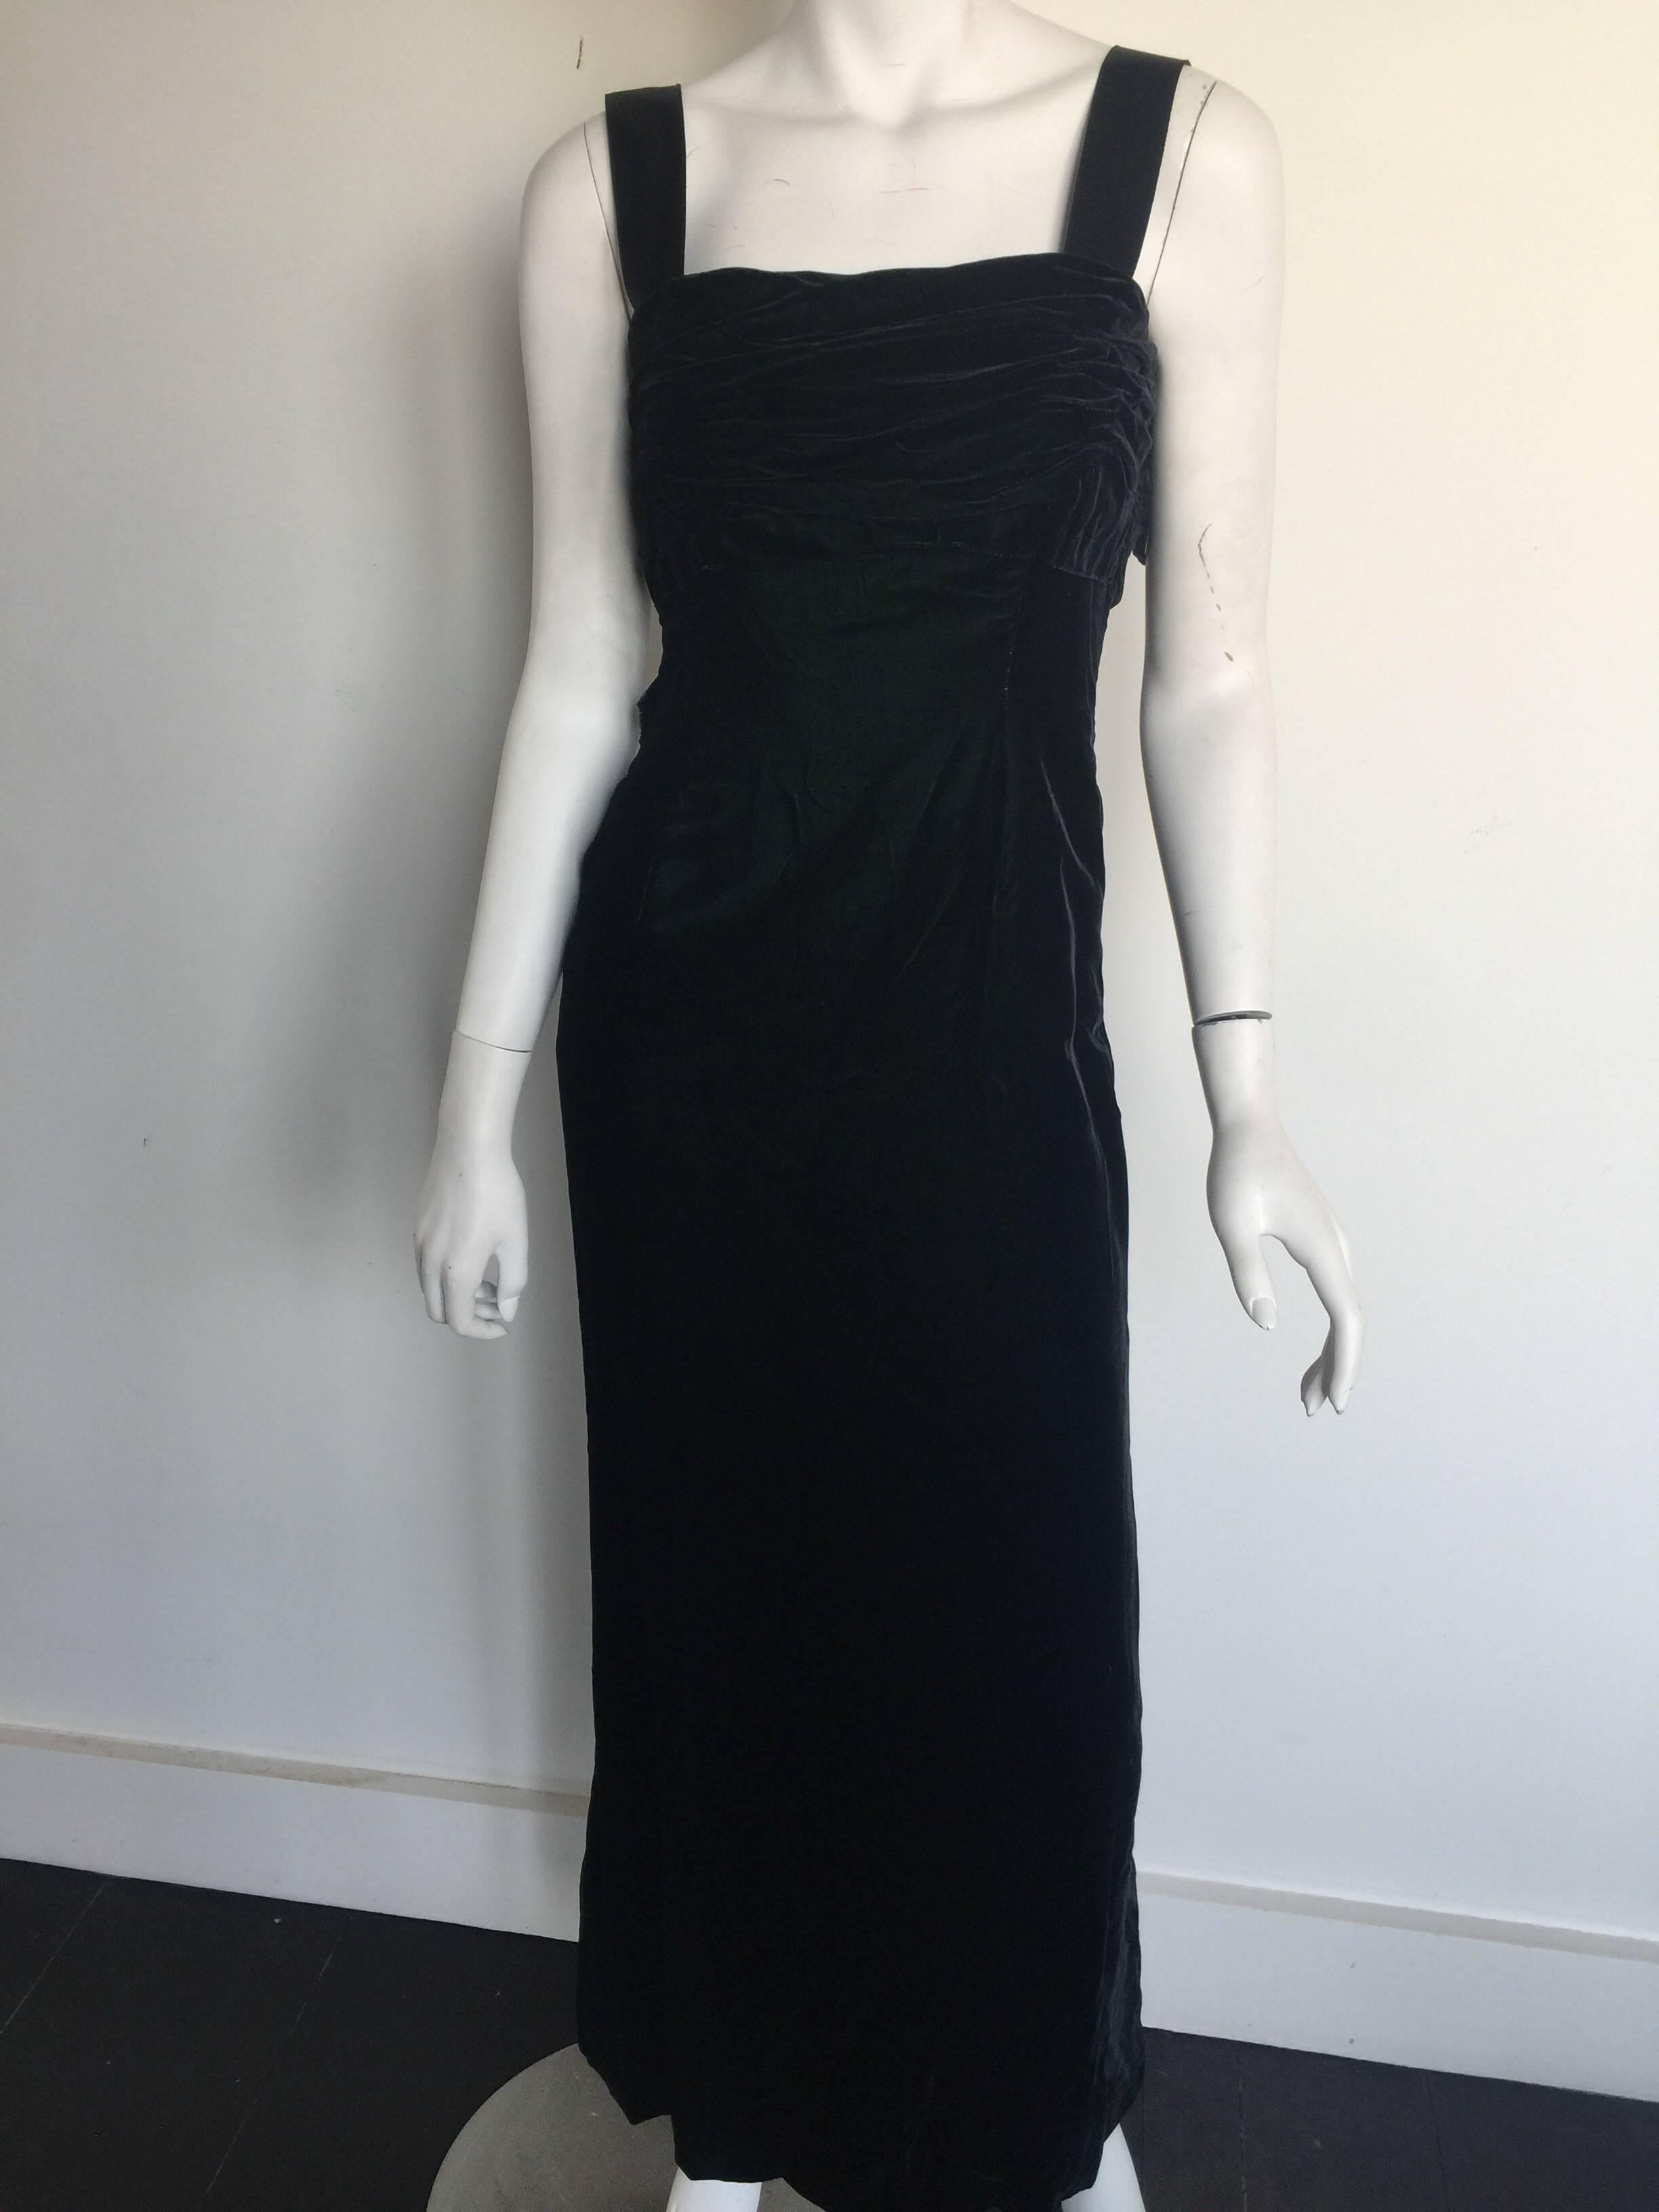 This dark green velvet dress almost looks black.  It has a ruched velvet chest and a form fitting cut.  It has thick grosgrain straps with plenty of room to be taken out or taken off even.  Two small bows on the back which can also be easily removed